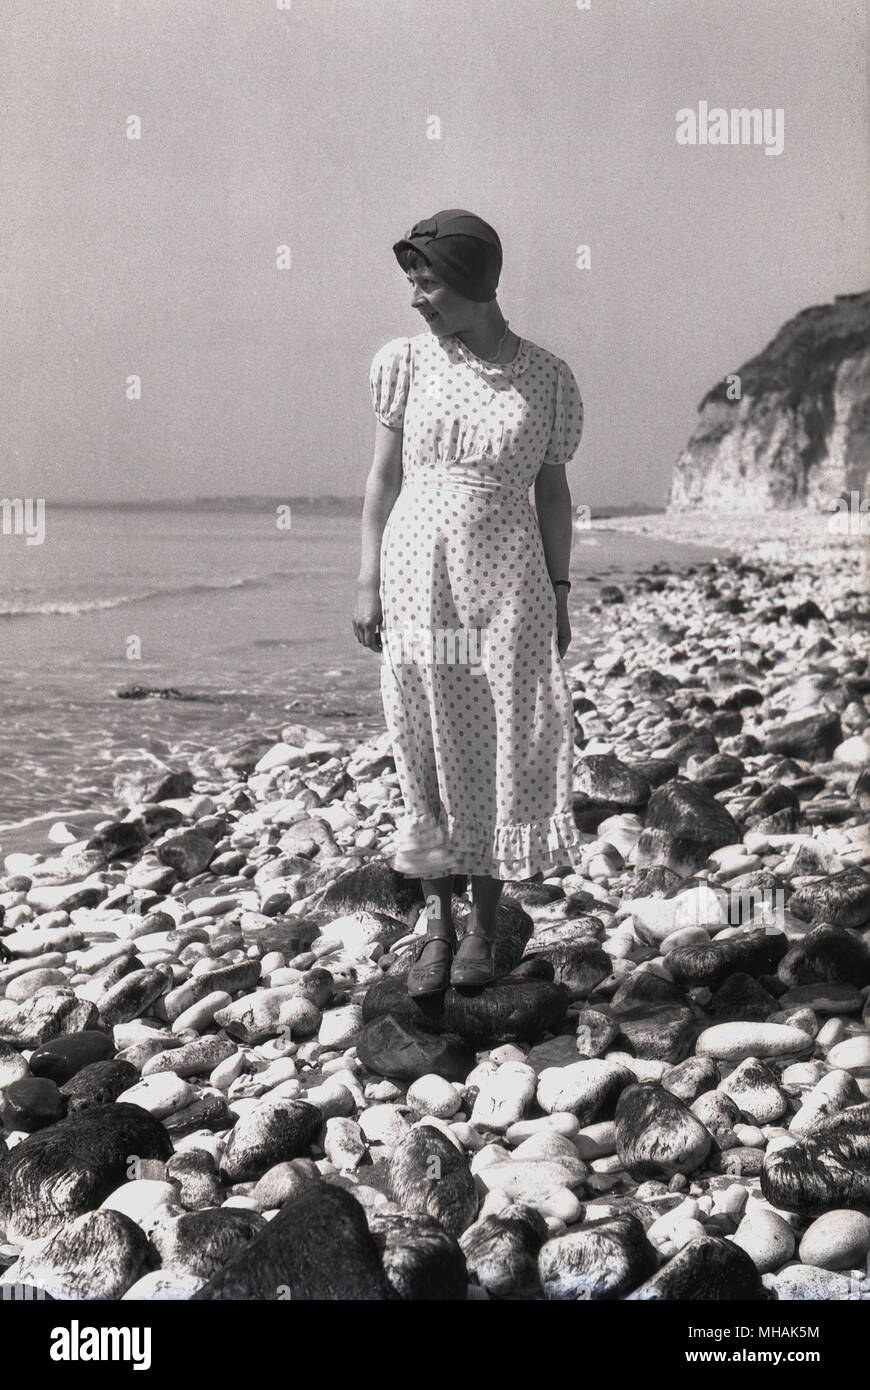 1930s, historical, lady standing on a pebbly beach wearing the latest fashions, a long polka-dot dress, shoes and hat, England, UK. Stock Photo